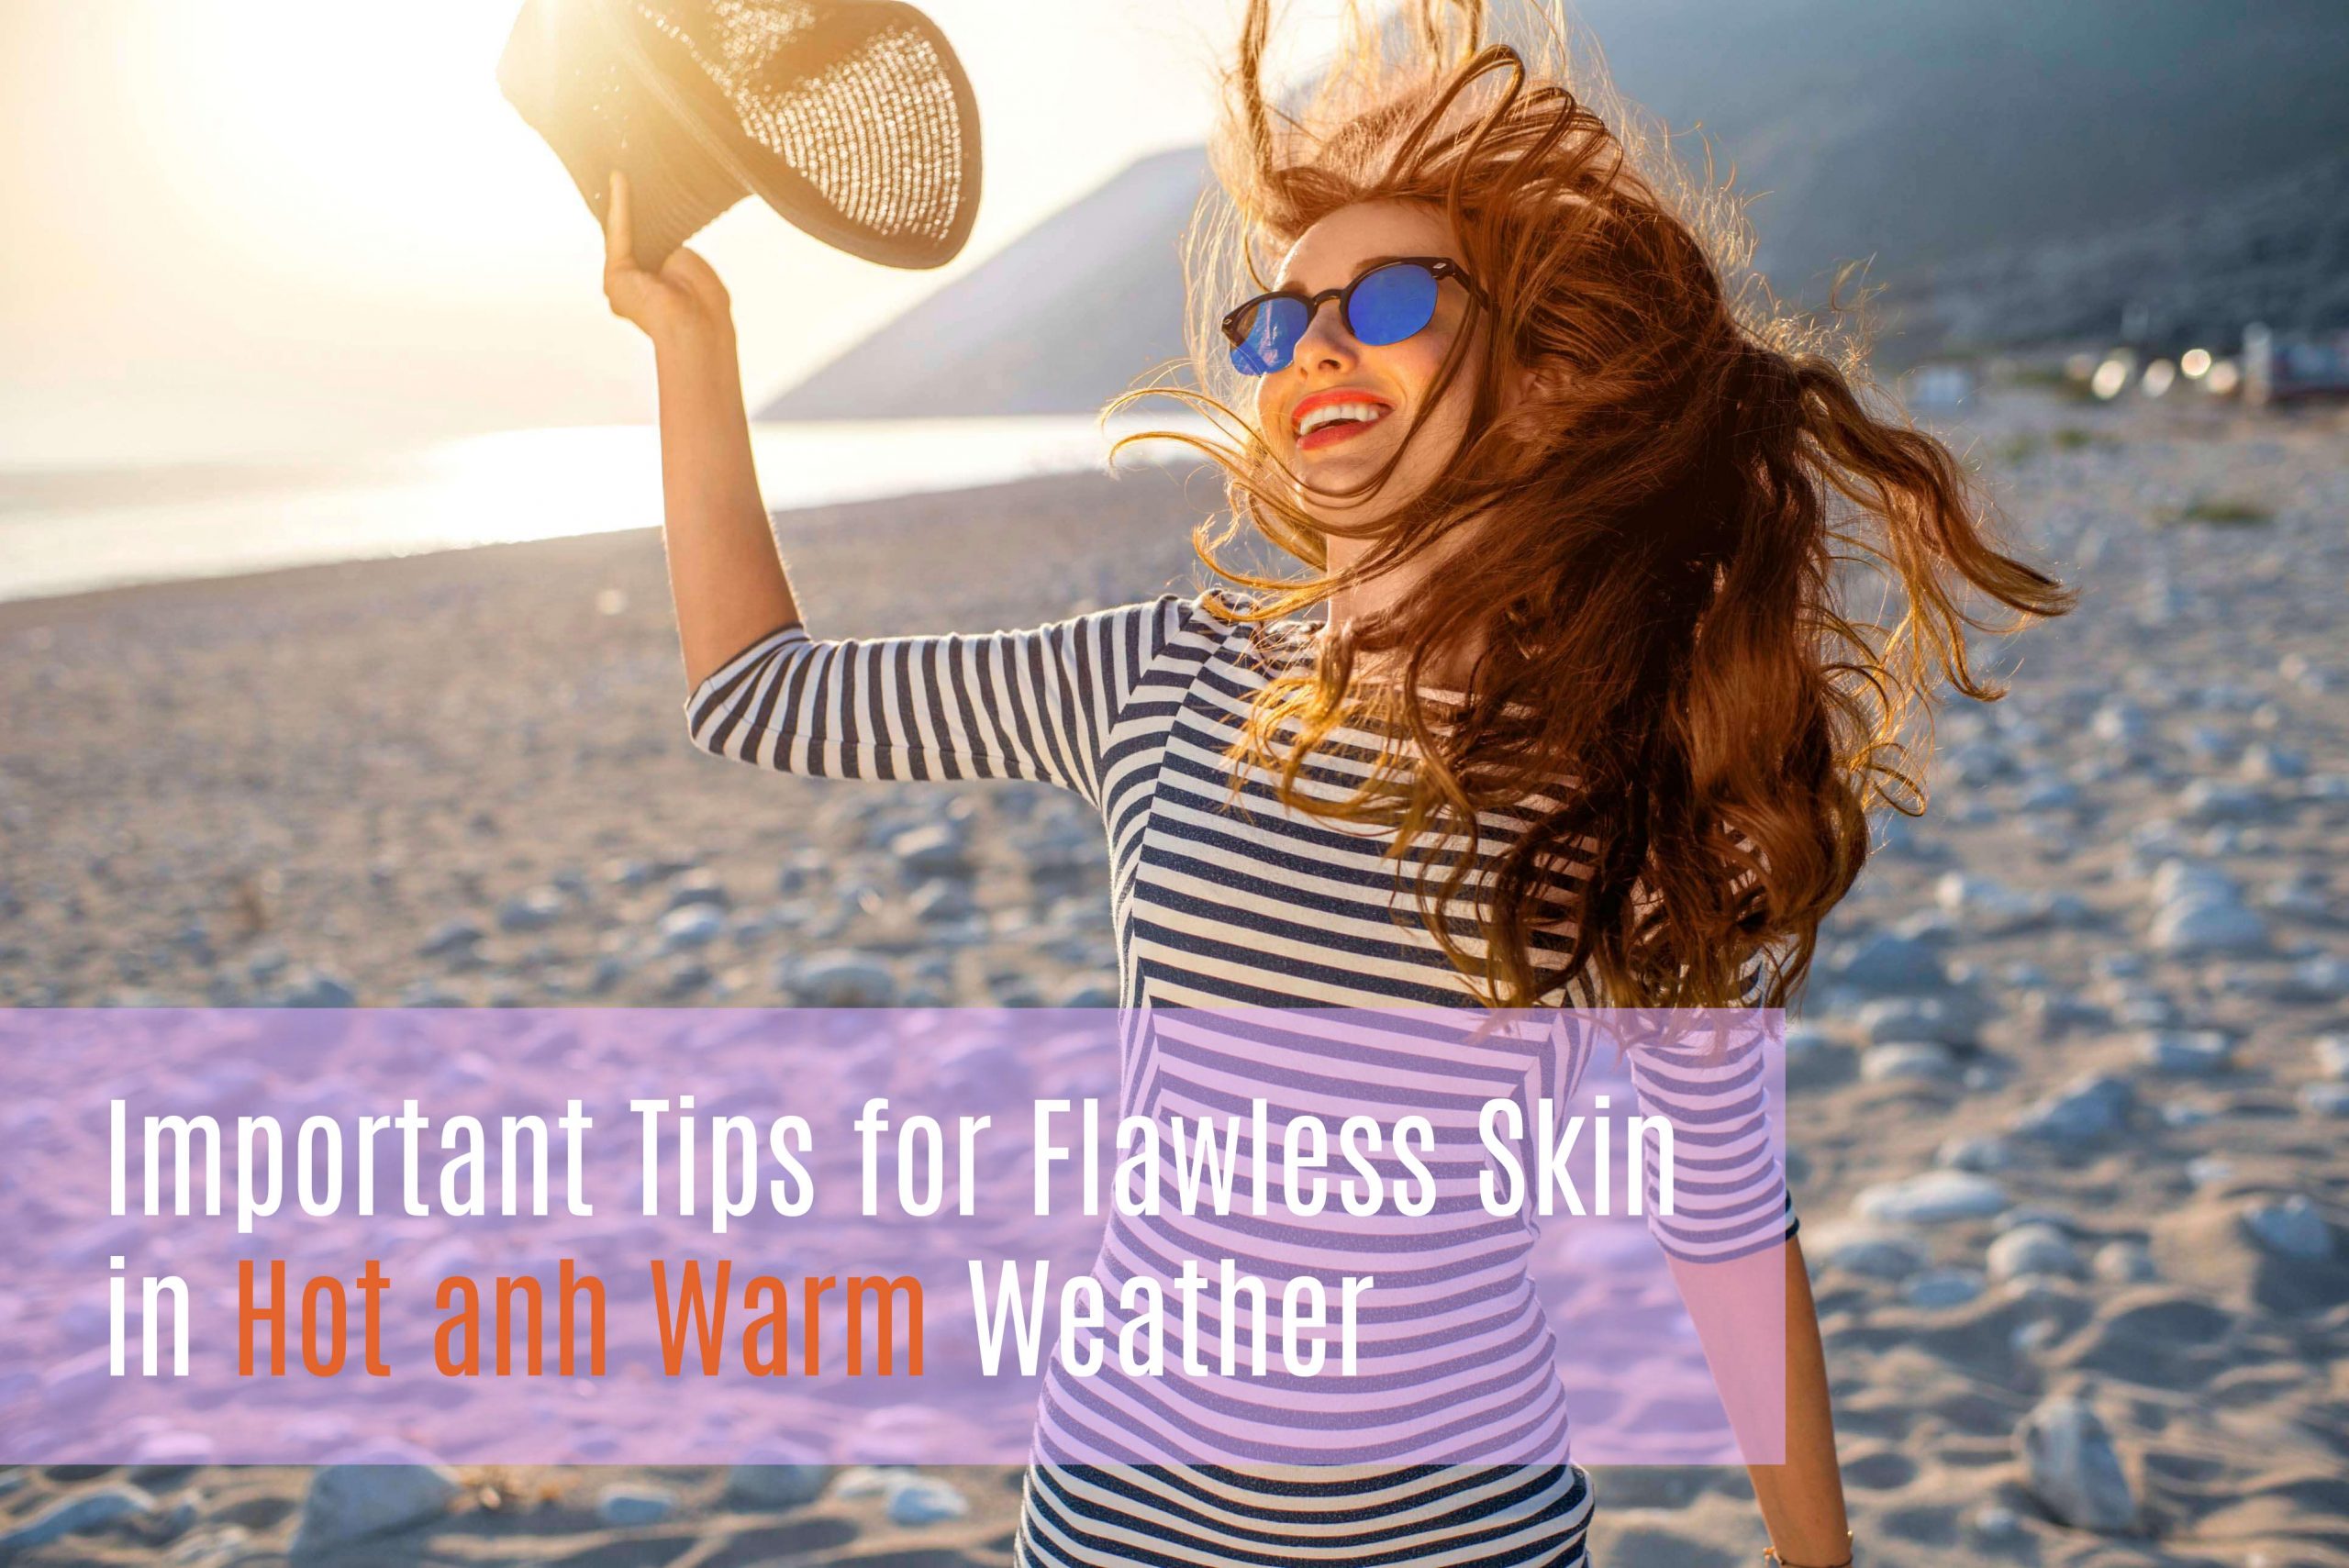 Important Tips for Flawless Skin in Hot and Warm Weather